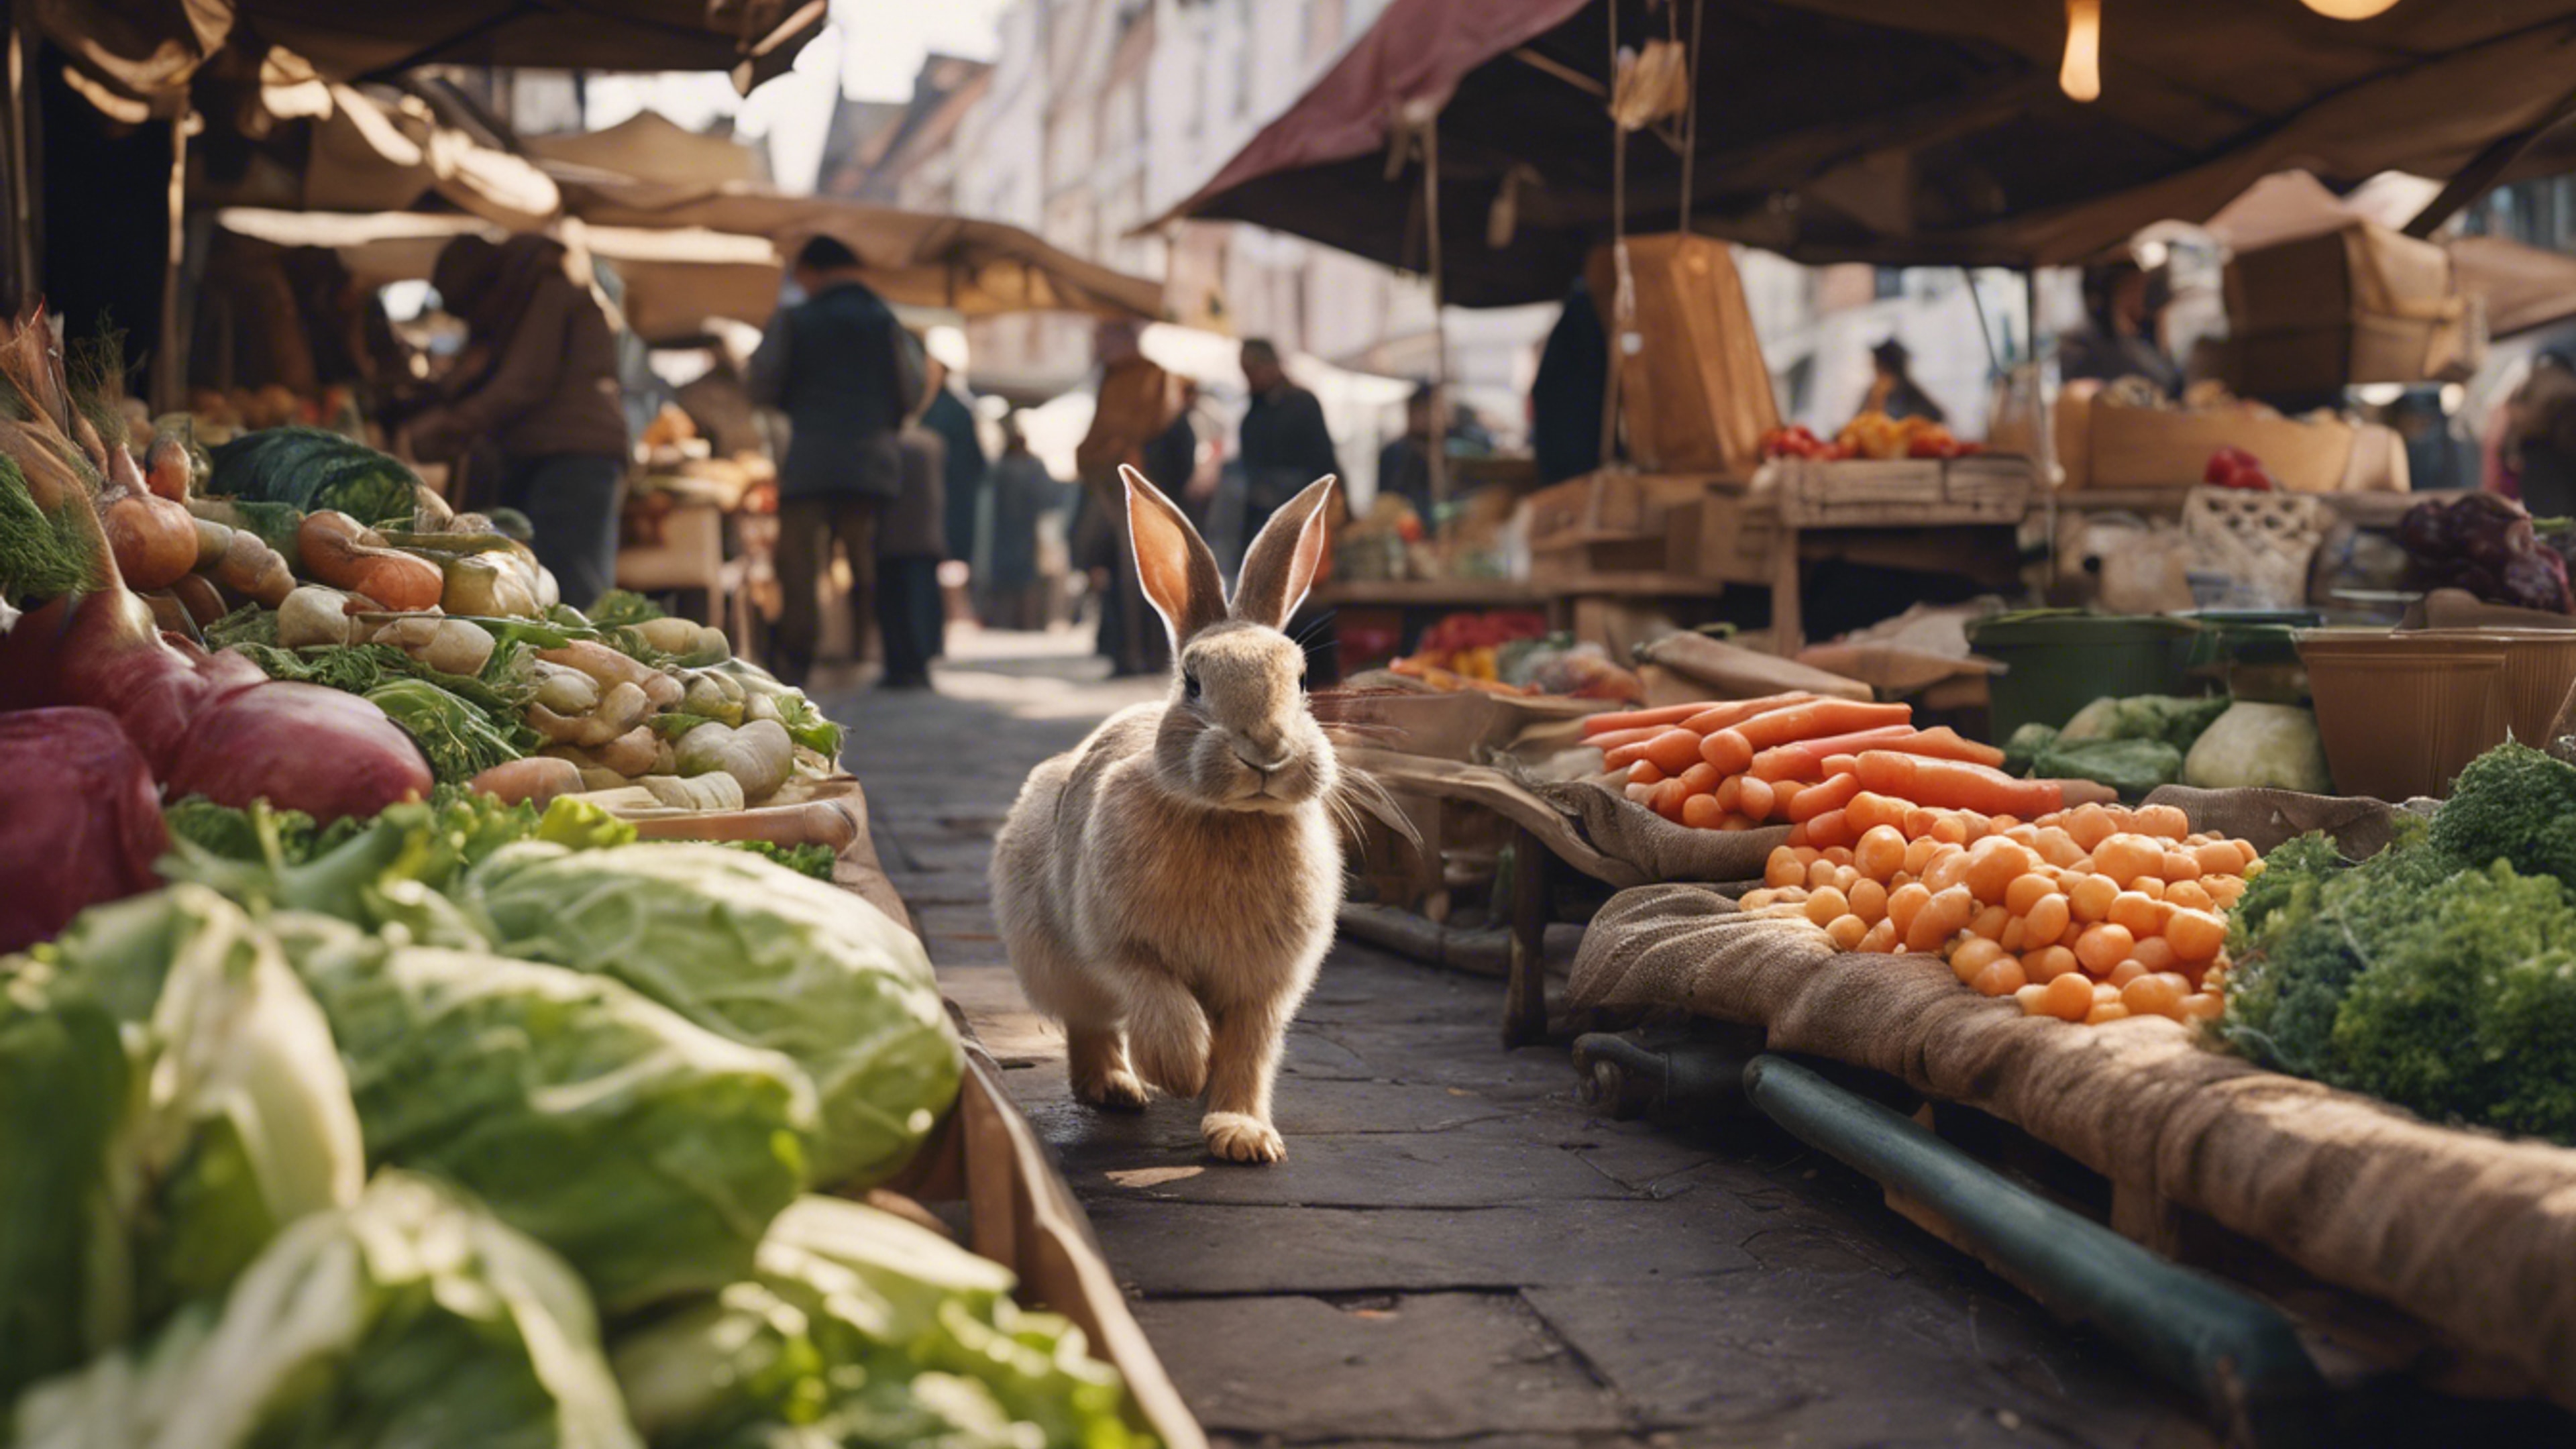 A rabbit running a vegetable stall in an old-fashioned market. Tapeta[95b88699917c48c6bf62]